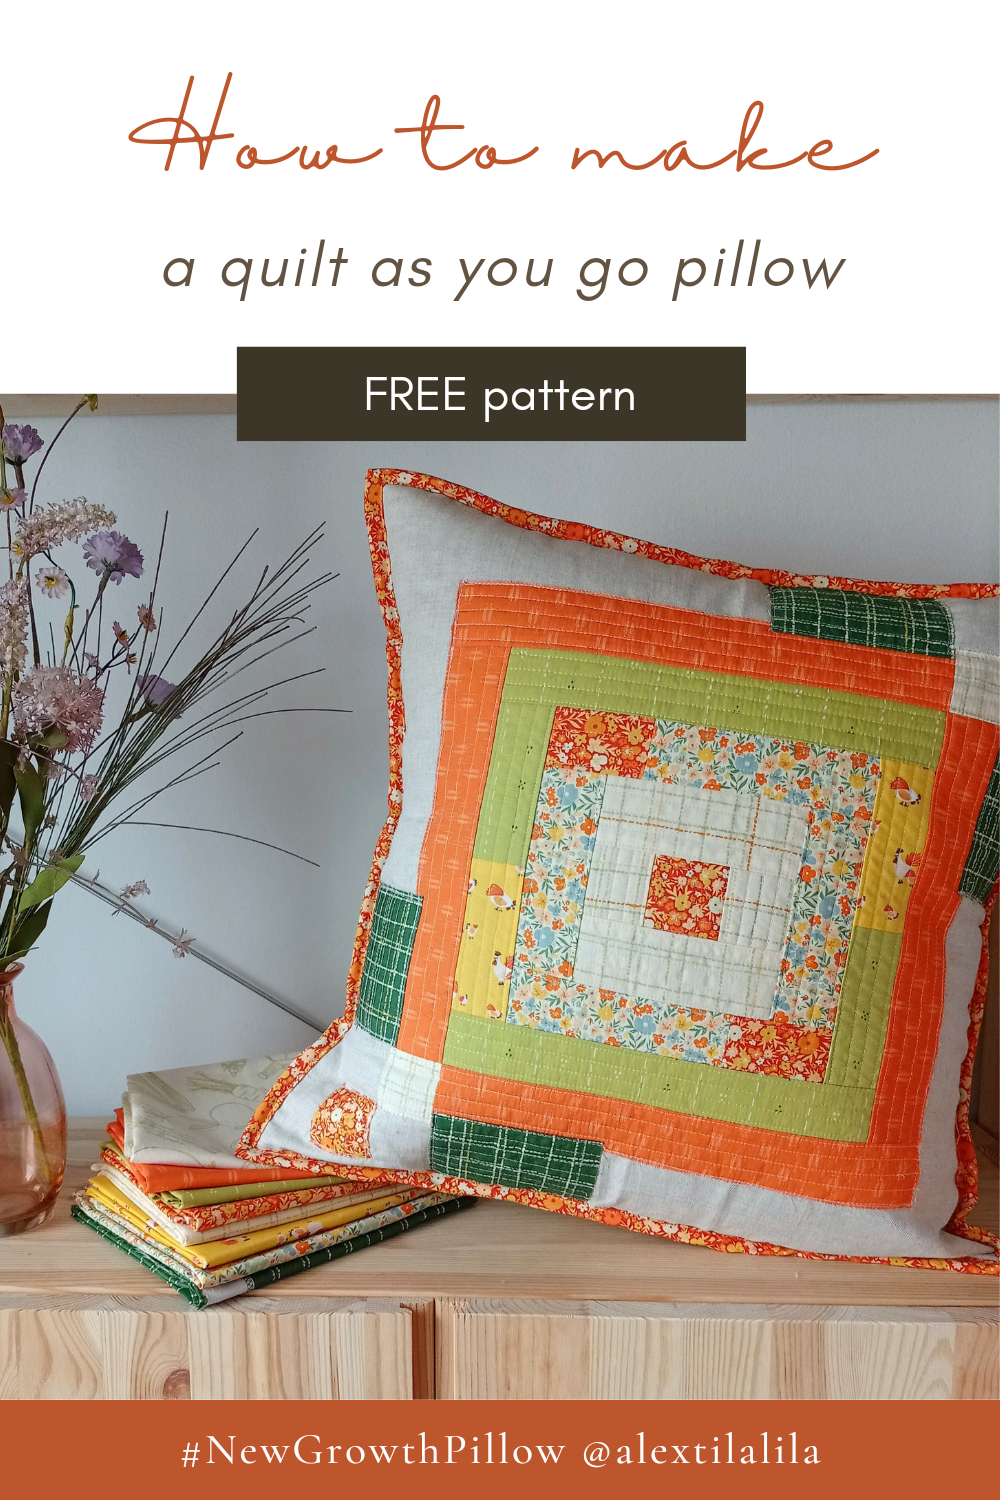 A new free quilted pillow pattern by Alexandra Bordallo. The New Growth pillow pattern is a quilt-as-you-go tutorial to learn how to make a qayg pillow. Featuring Grow and Harvest fabric collection designed by Alexandra Bordallo for Art Gallery Fabrics